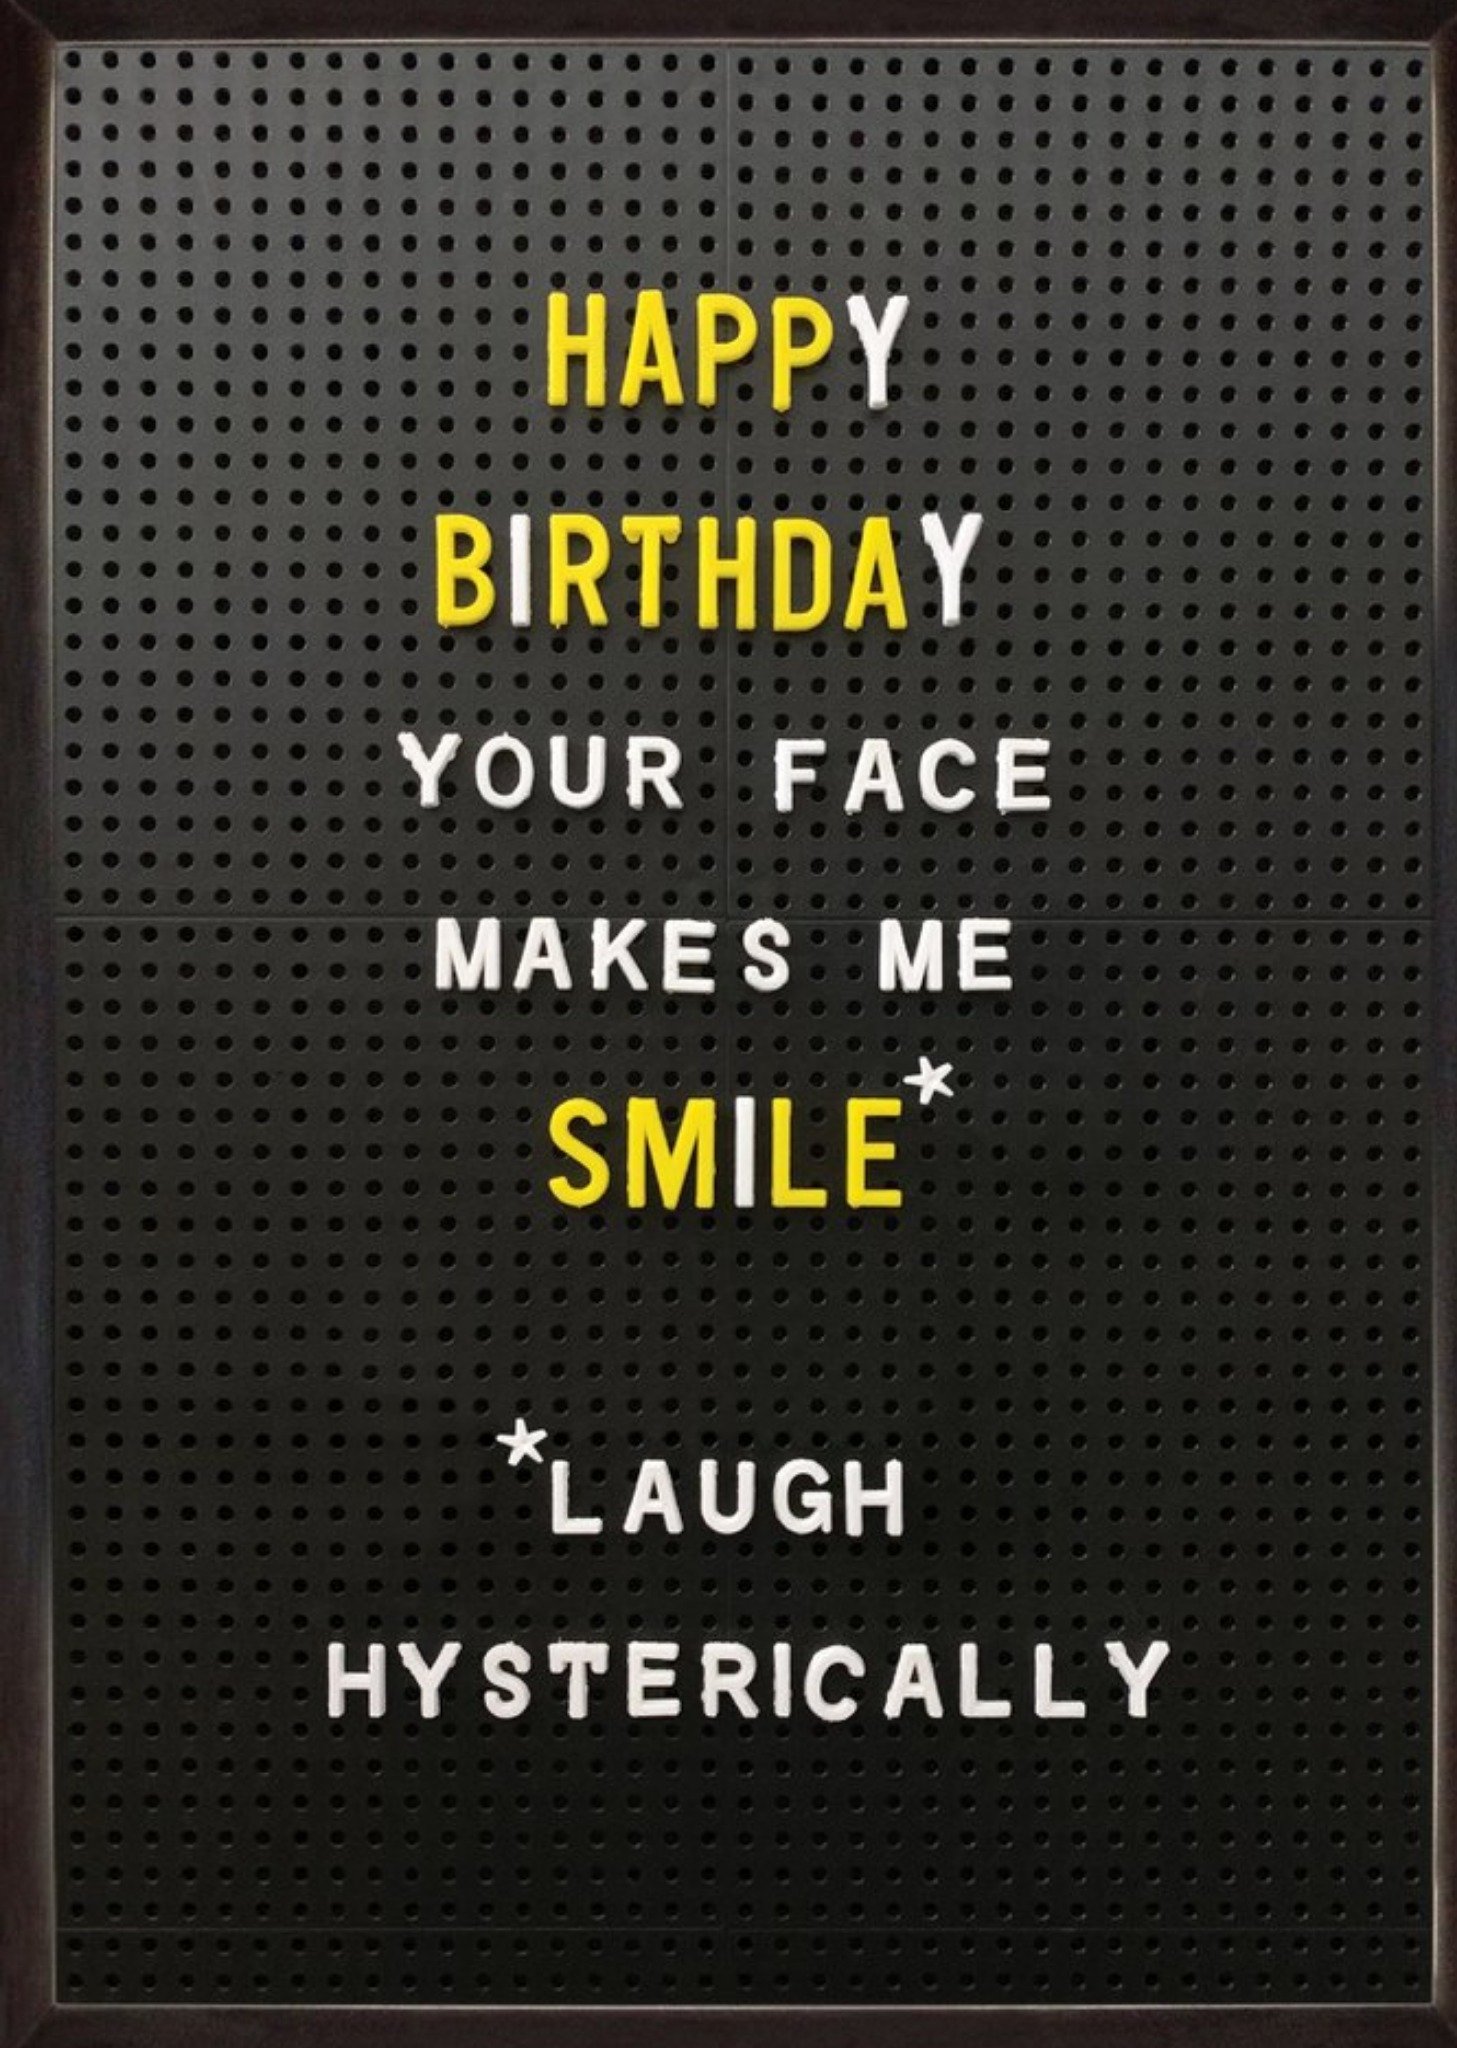 Brainbox Candy Your Face Makes Me Smile Birthday Card, Large